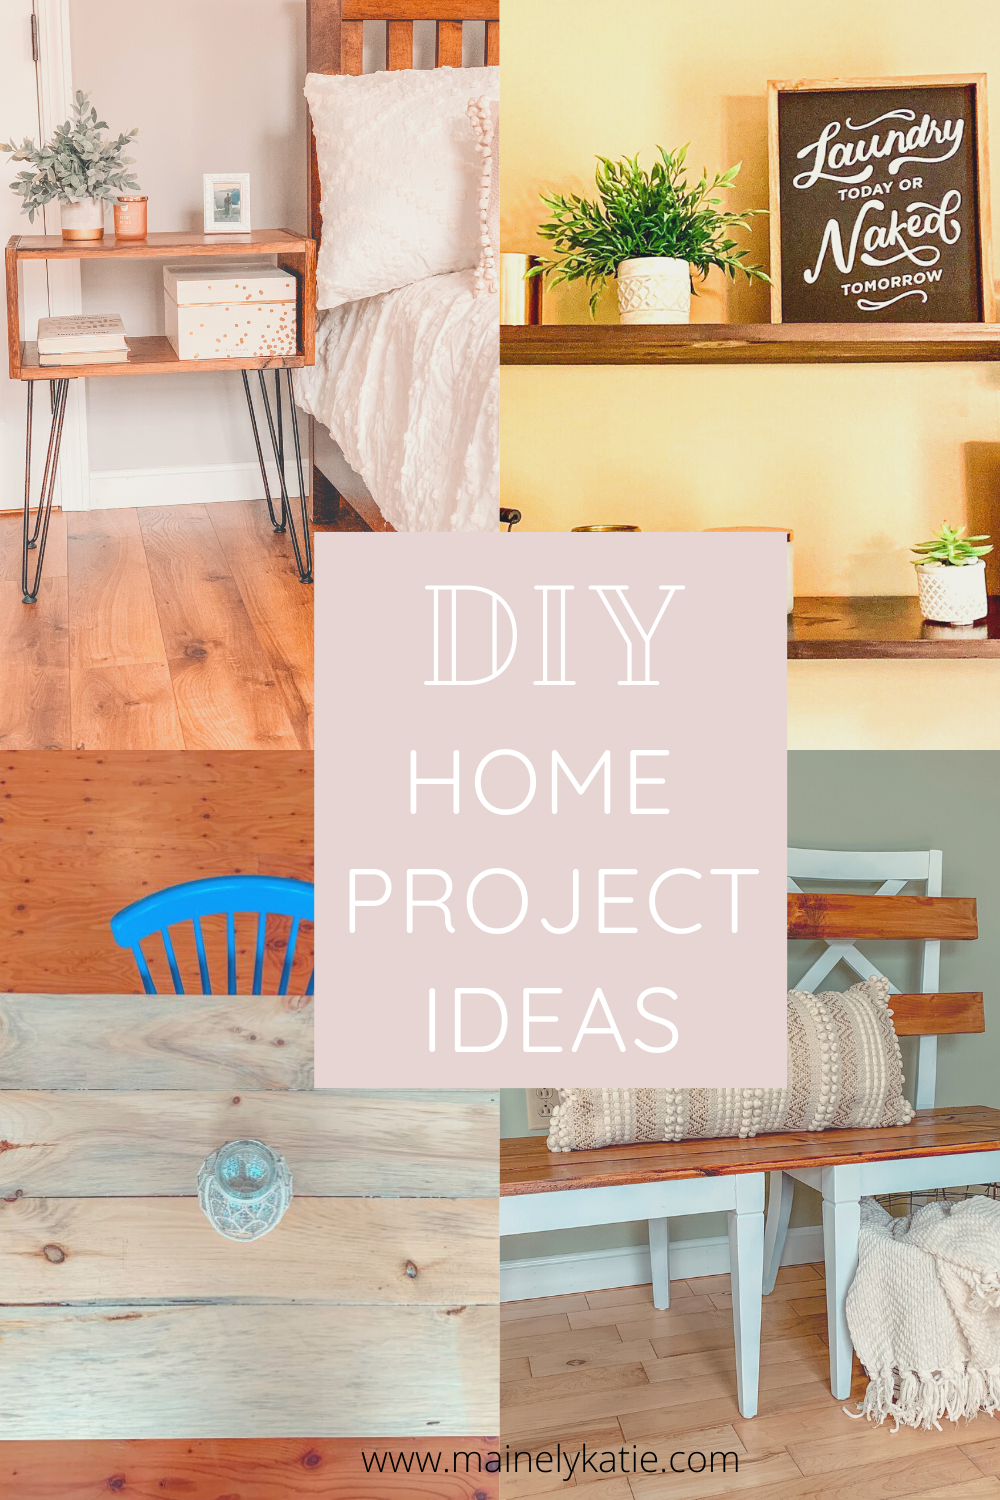 DIY home projects have been my jam lately! We have lived in our house for 3.5 years now and have made some small improvements, but nothing major. I have no background in anything crafty or carpentry related. But lately, I have been enjoying a few DIY home projects that are easy for beginners like me. Some projects include making our own home decor and upcycling some old furniture. Here are my favorite 7 easy DIY home projects for beginners that you can do this weekend.